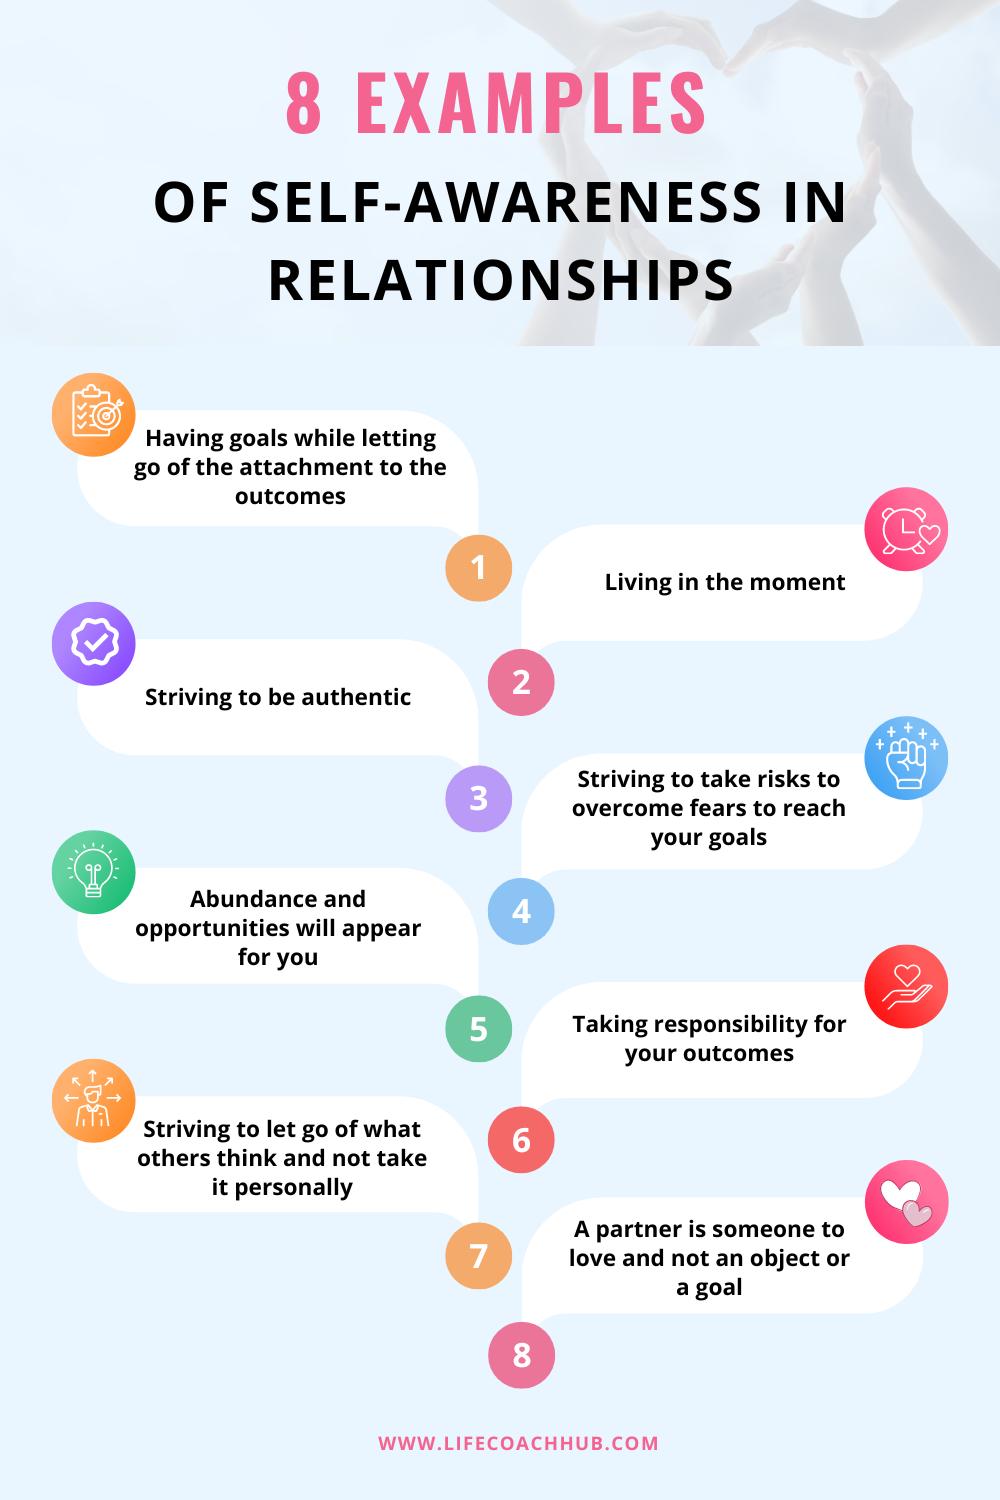 8 Examples of self-awareness in relationships